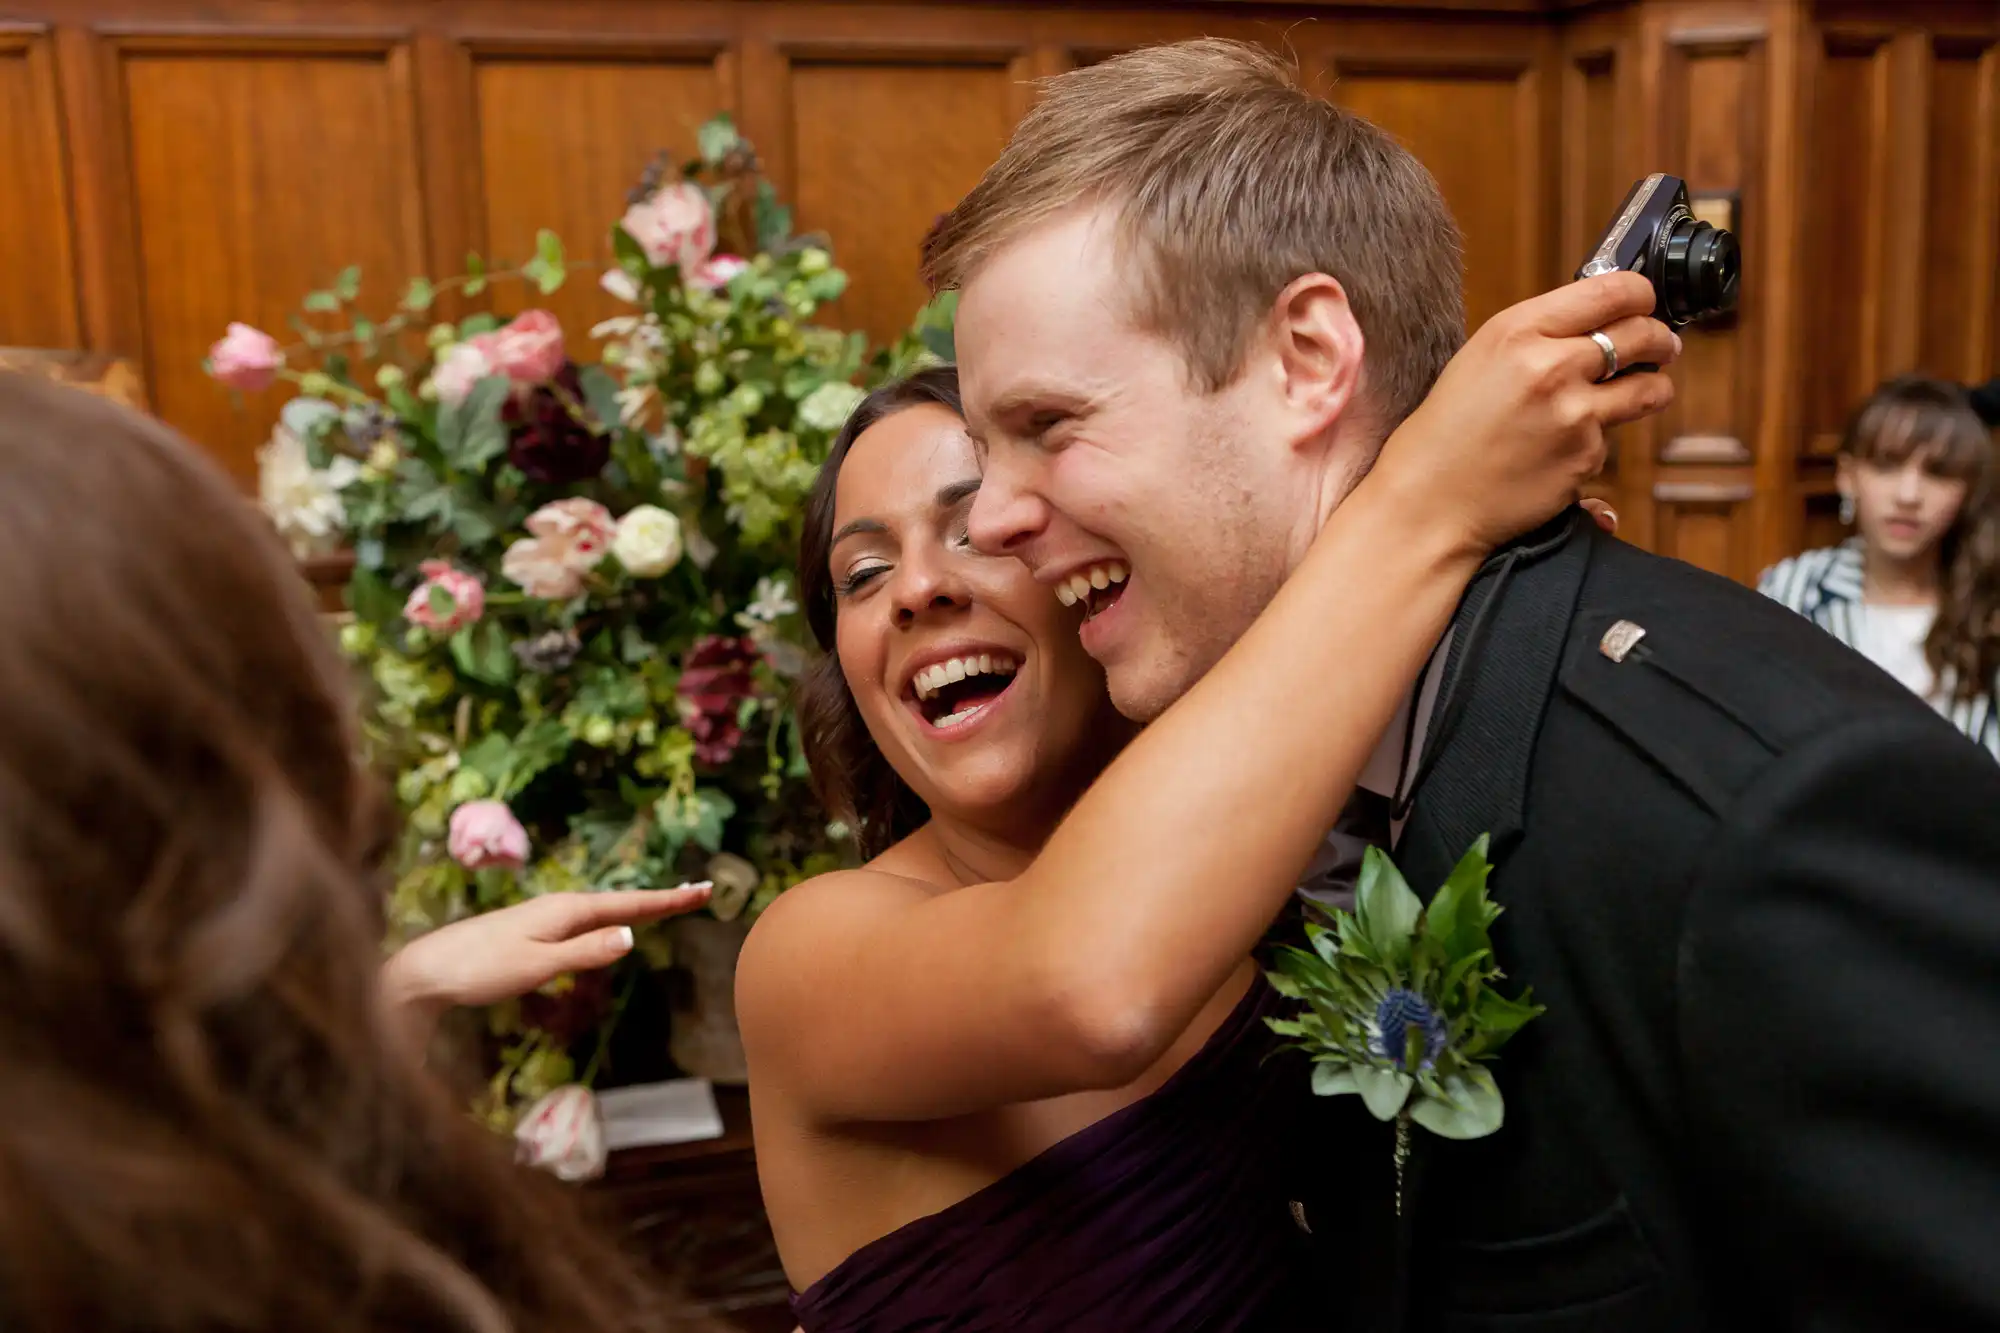 A joyful couple hugging and laughing at a wedding reception, surrounded by guests and floral decorations.